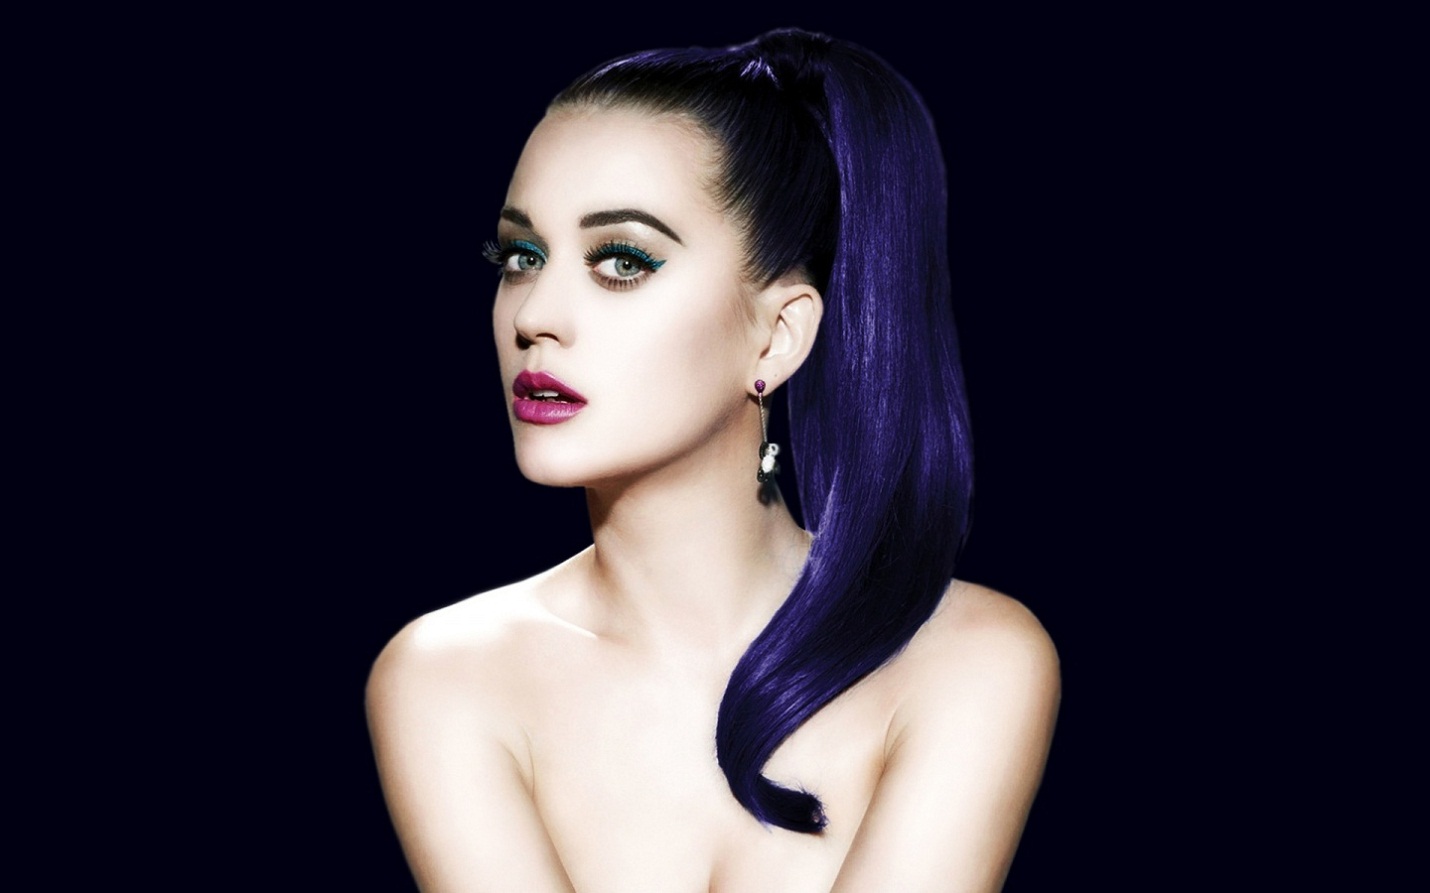 Katy Perry wallpapers | wallpapers in high definition hd for ...